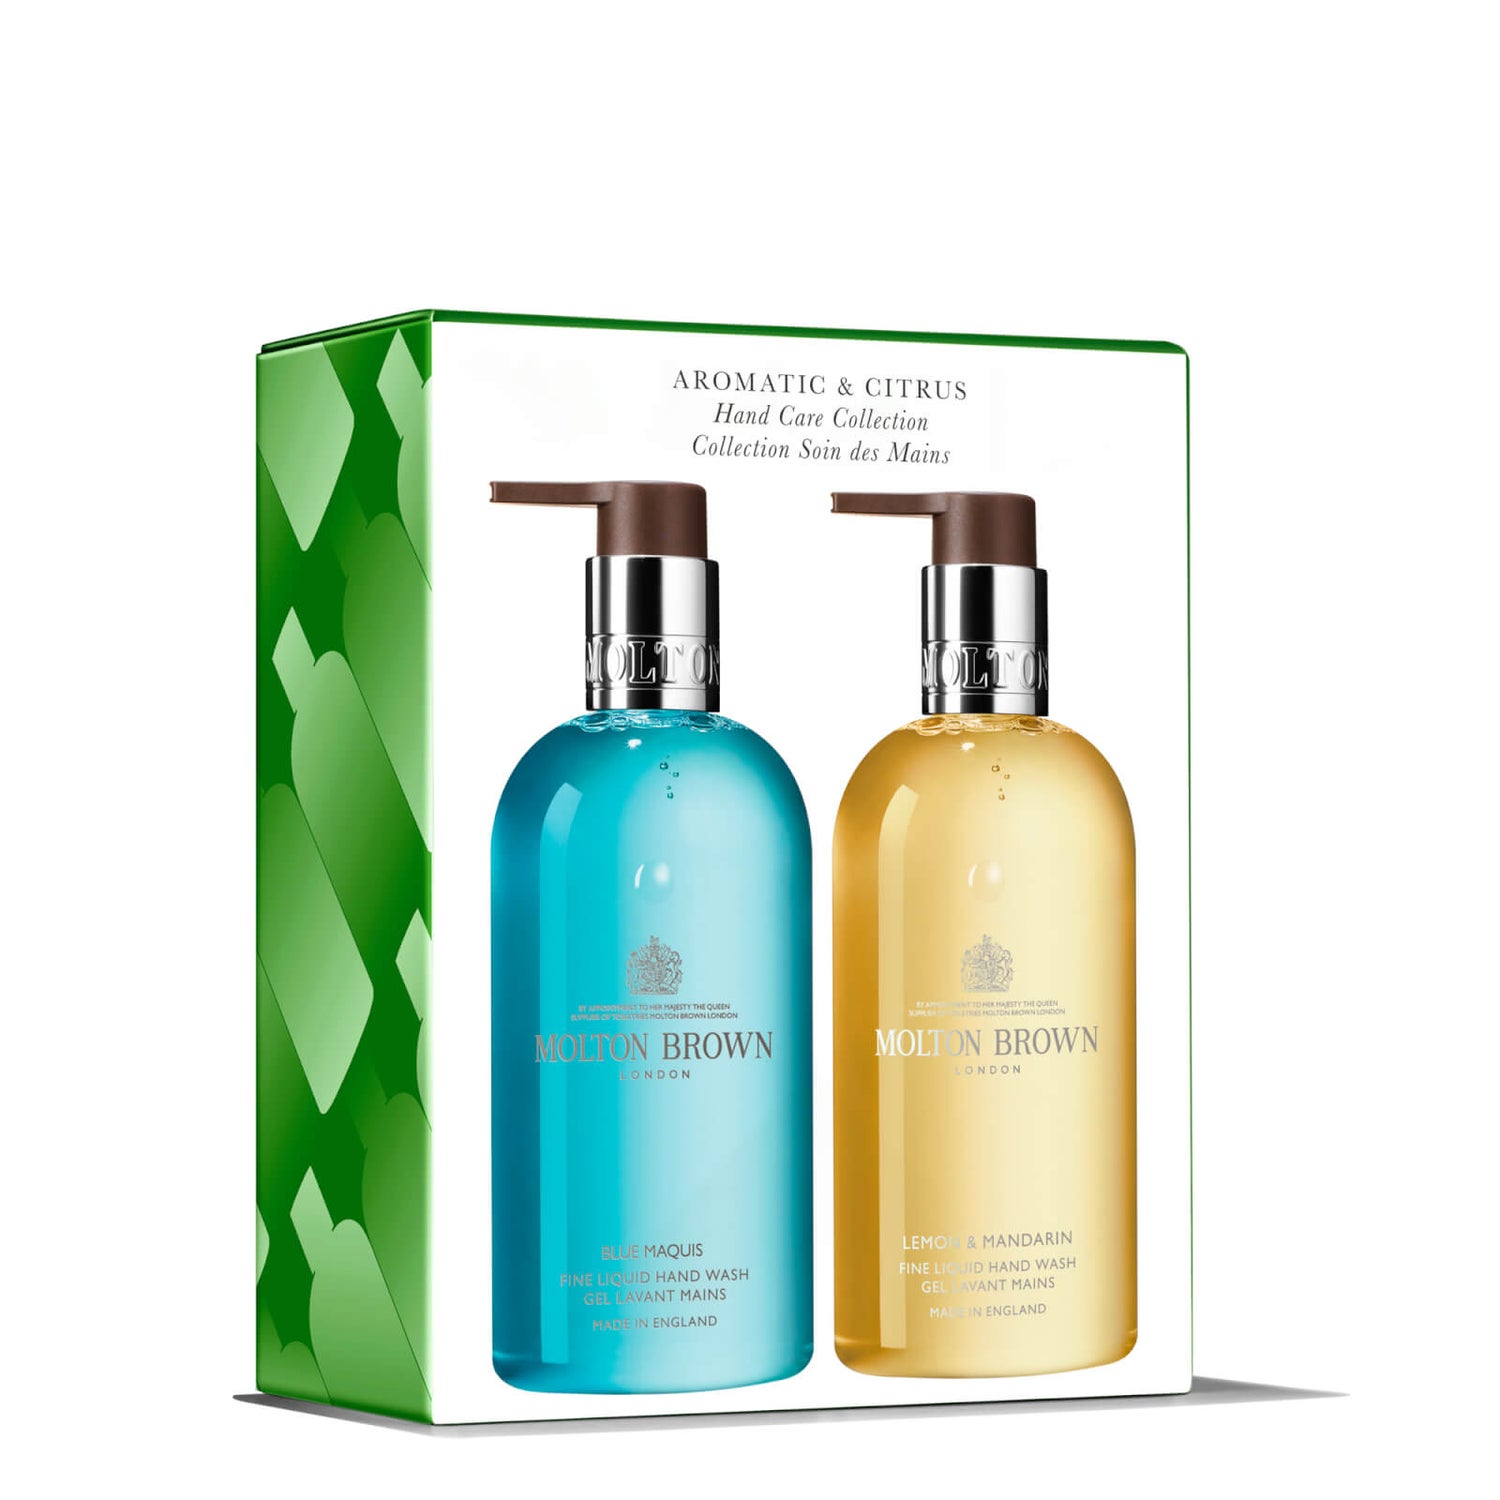 Molton Brown Aromatic & Citrus Hand Care Collection (Worth £44.00)